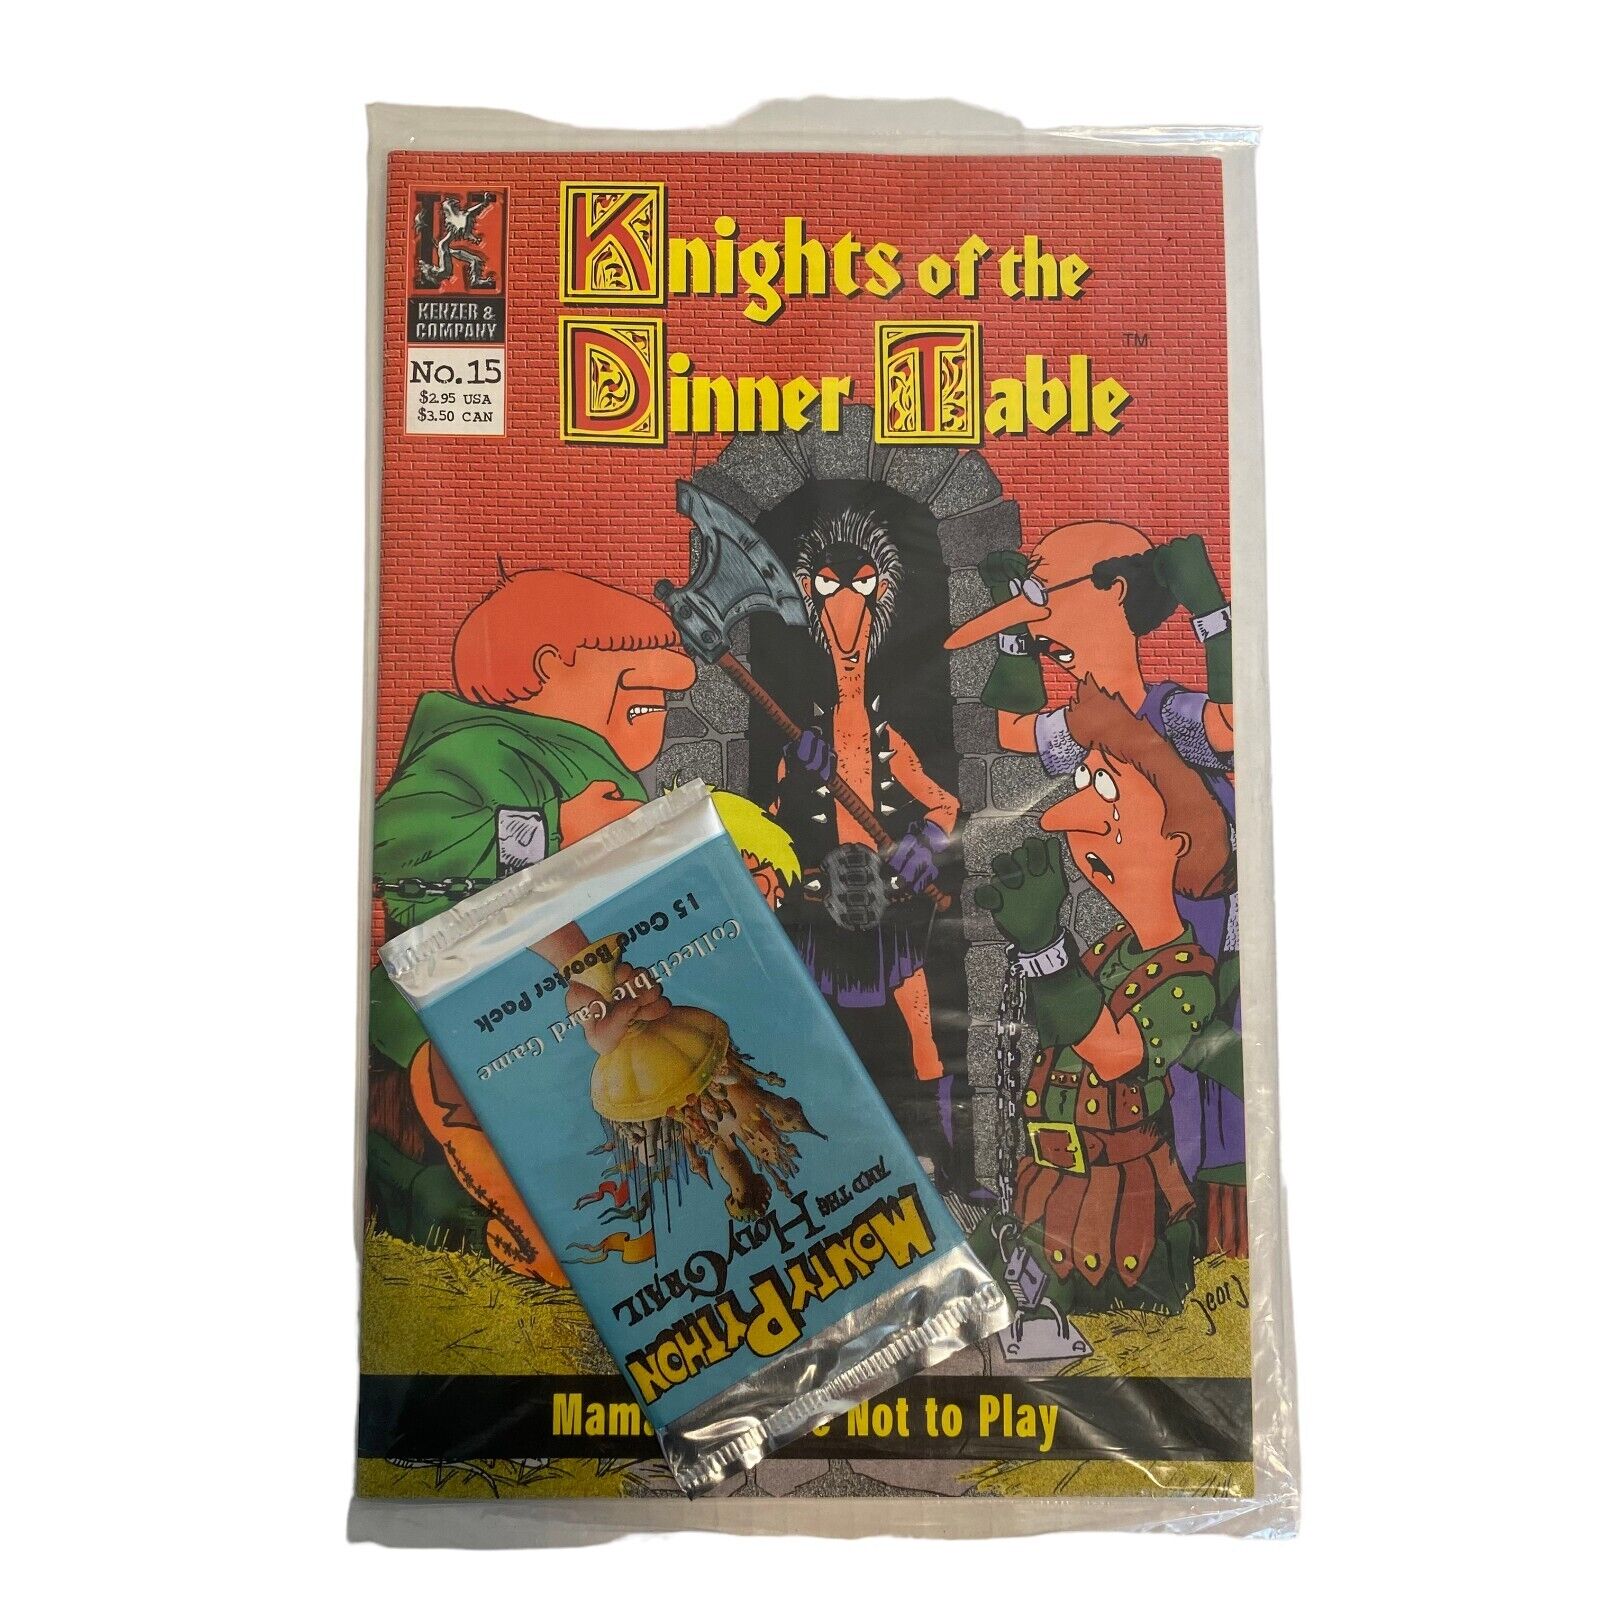 Knights of the Dinner Table Issue #15 w/ Monty Python Cards Sealed Polybag